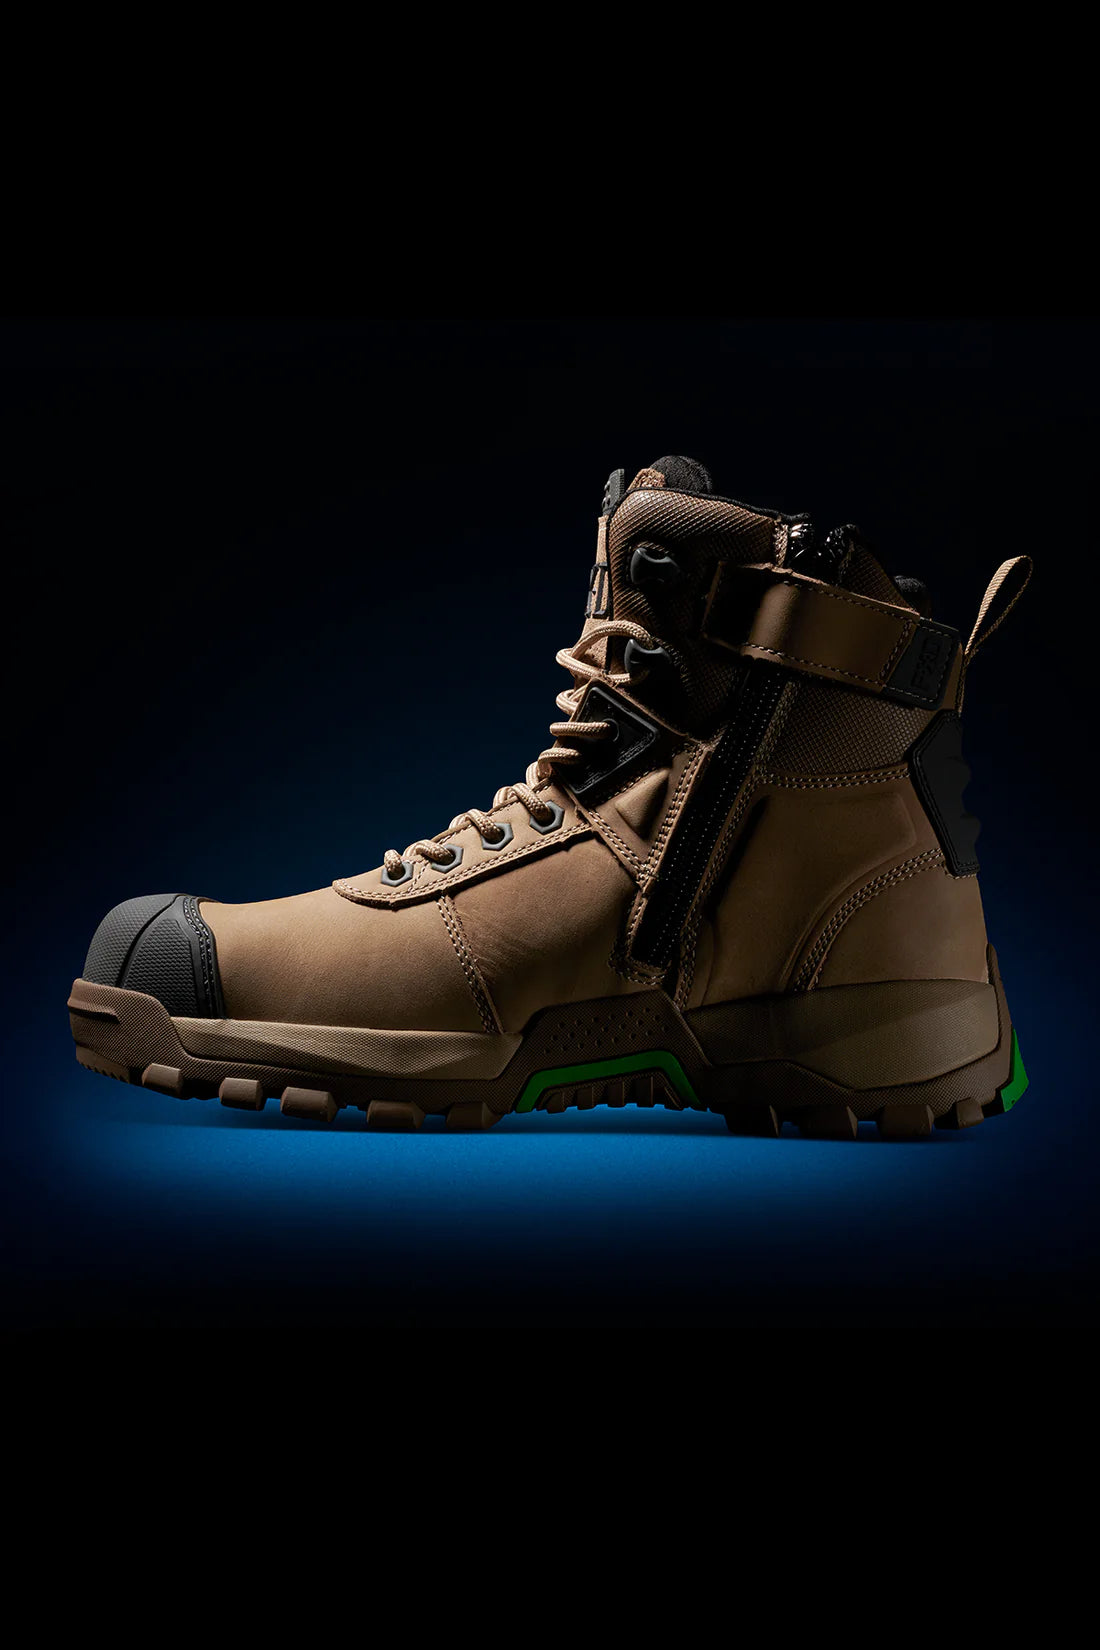 High Zip Sided High Cut Safety Boots - made by FXD Footwear